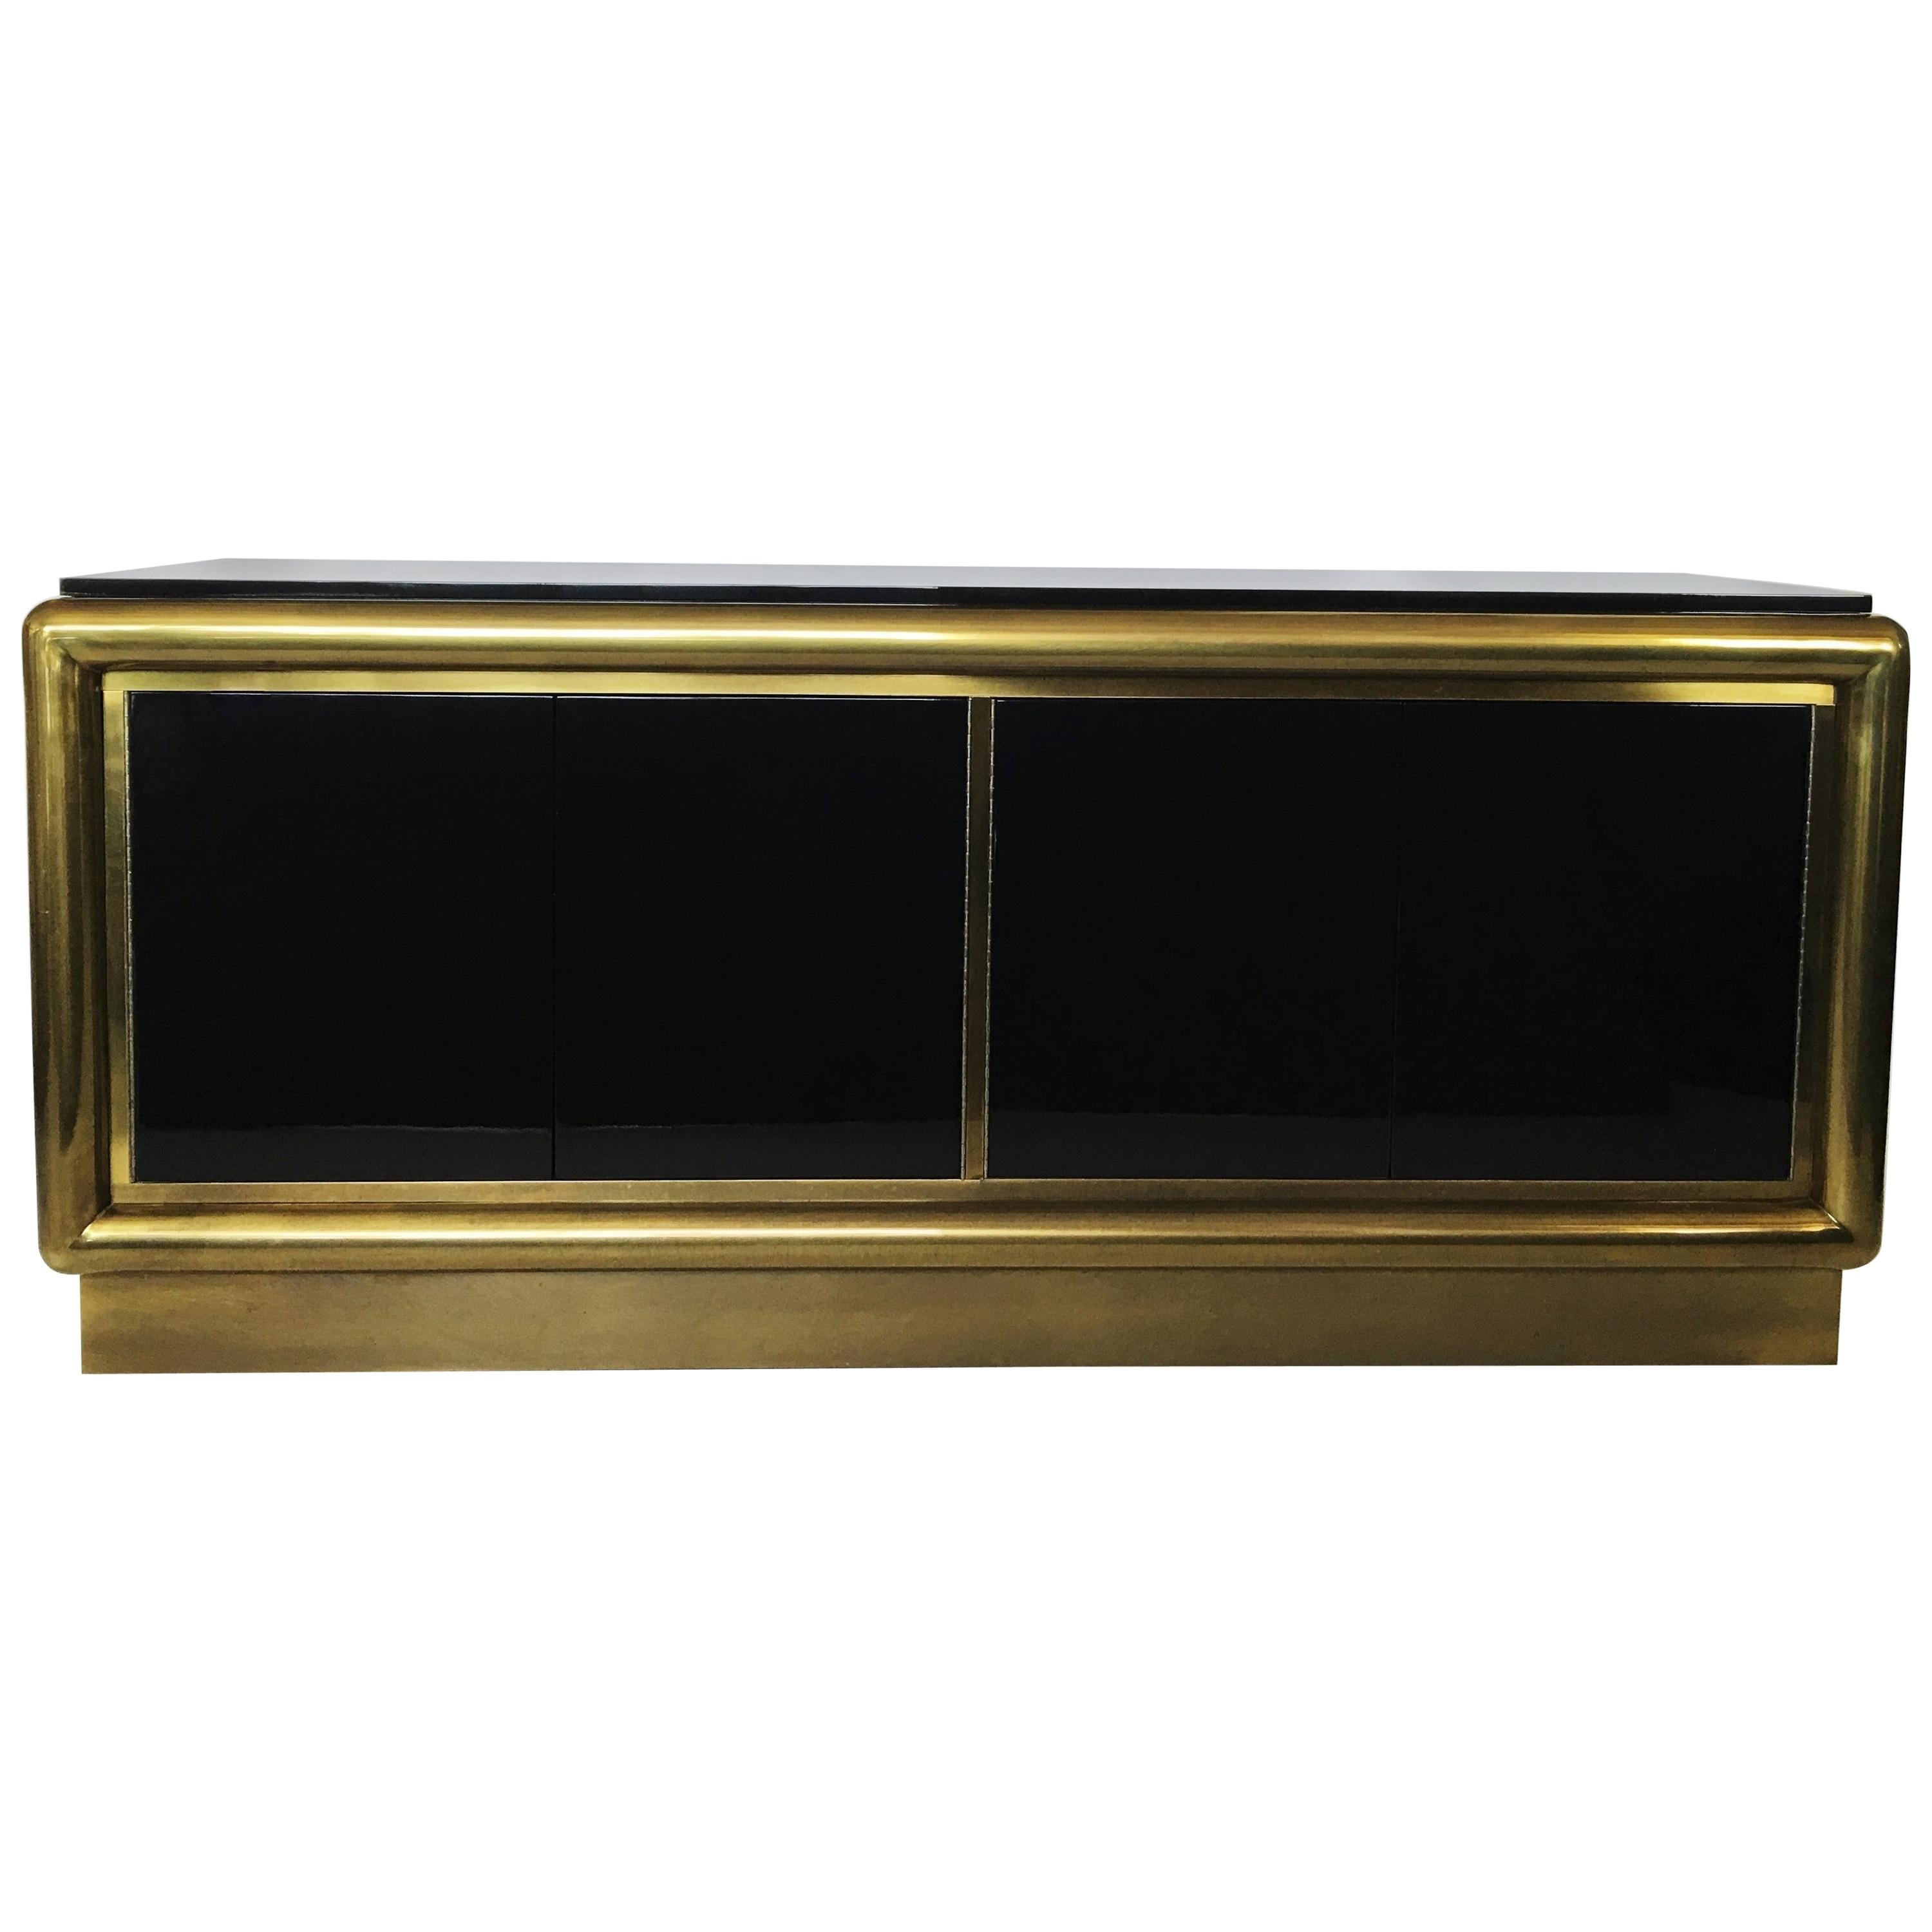 Black Lacquer and Brass Credenza/Sideboard by Mastercraft